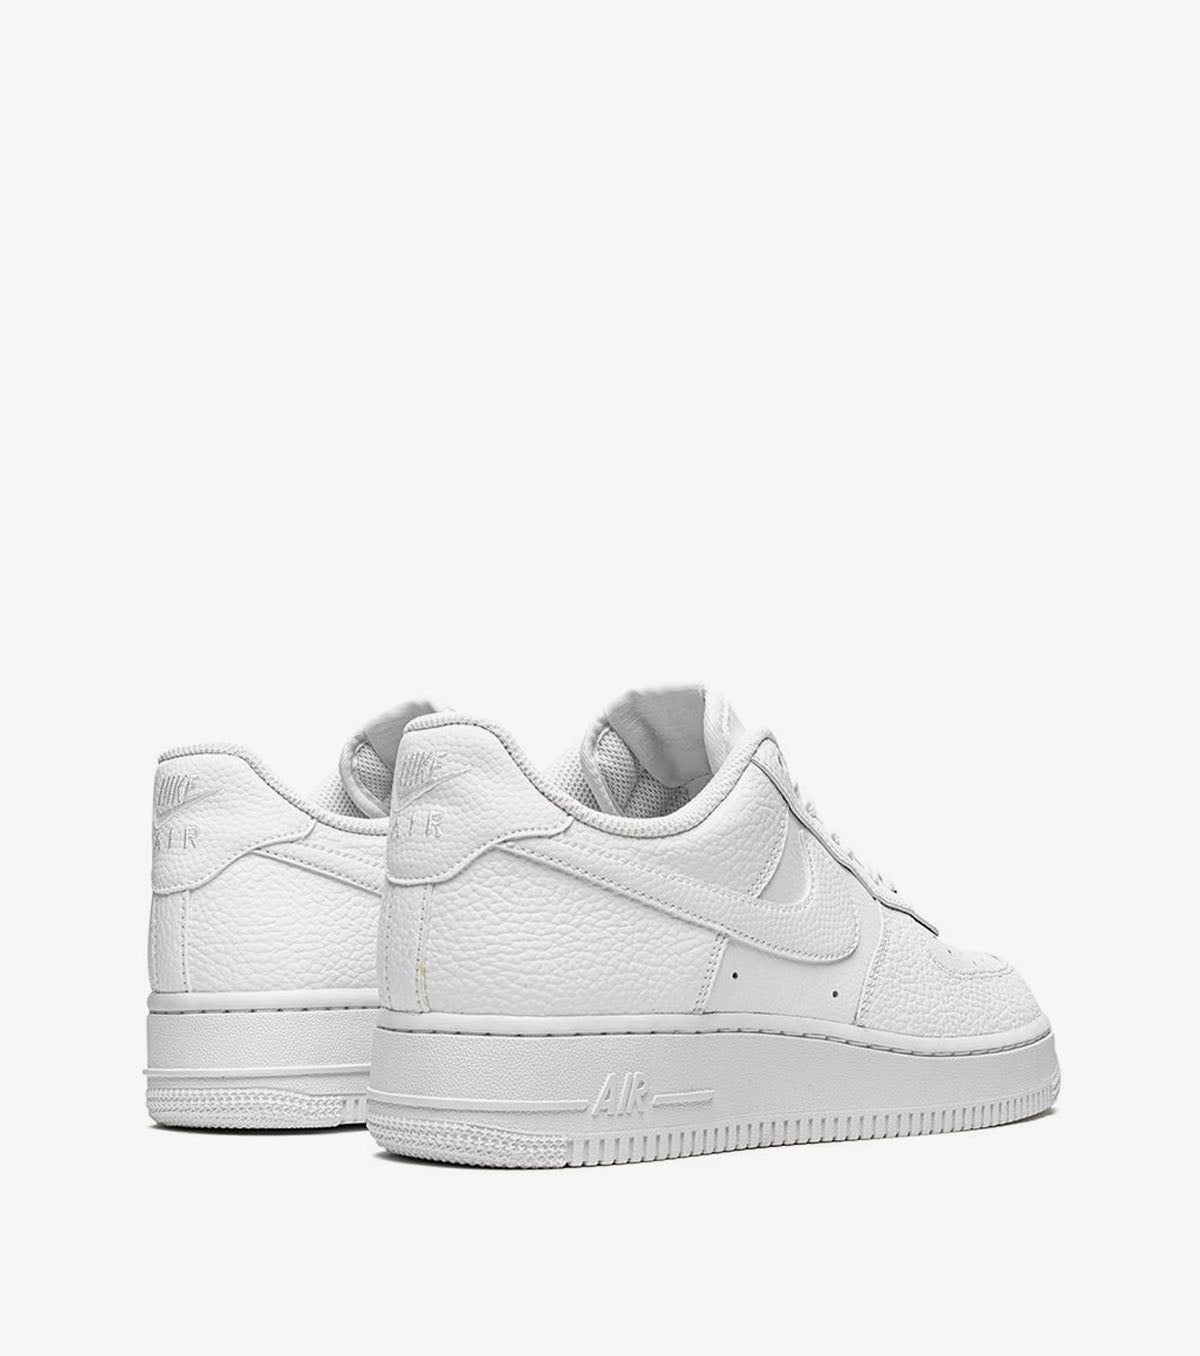 Air Force 1 '07 - SNKRBASE